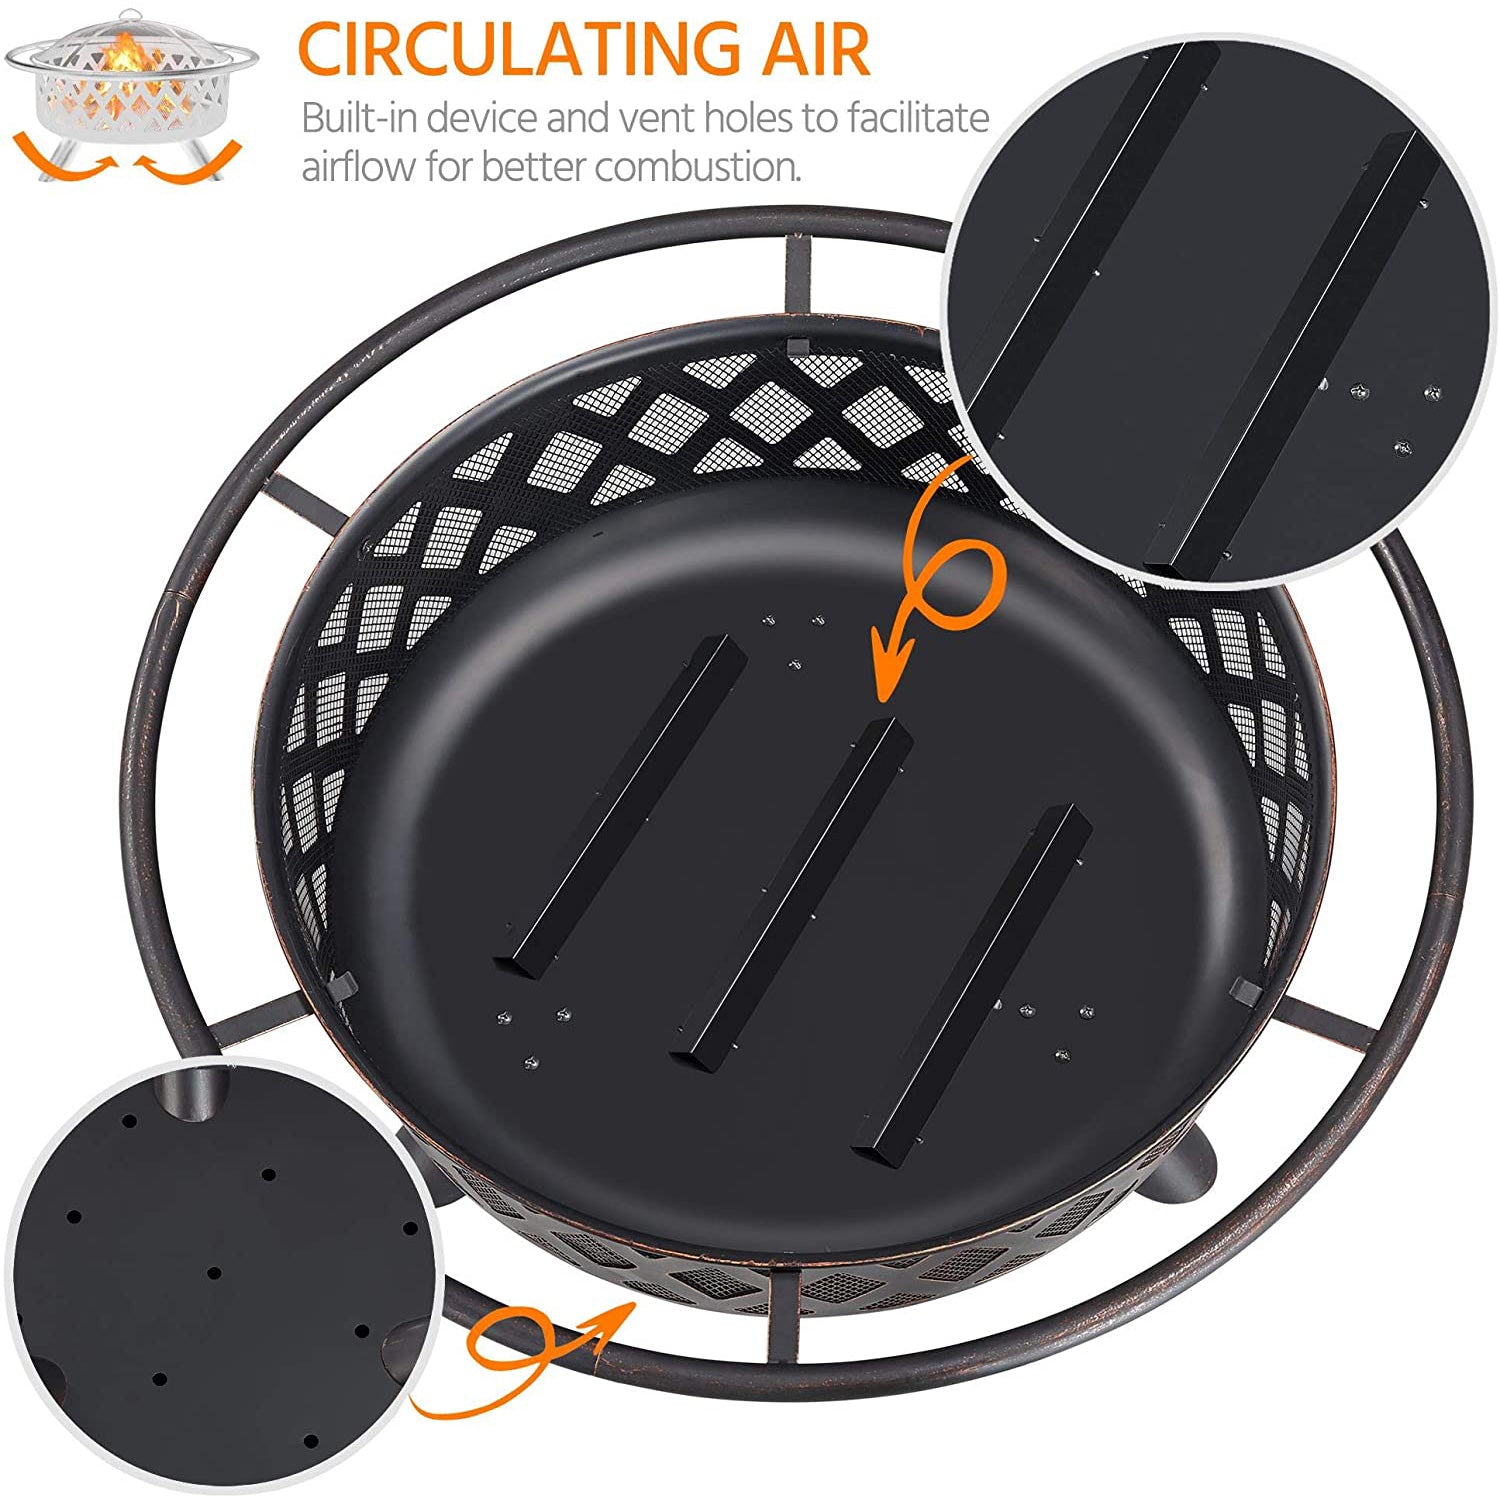 Fire Pit | 36 Inch Outdoor Fire Pit Grill Firebowl